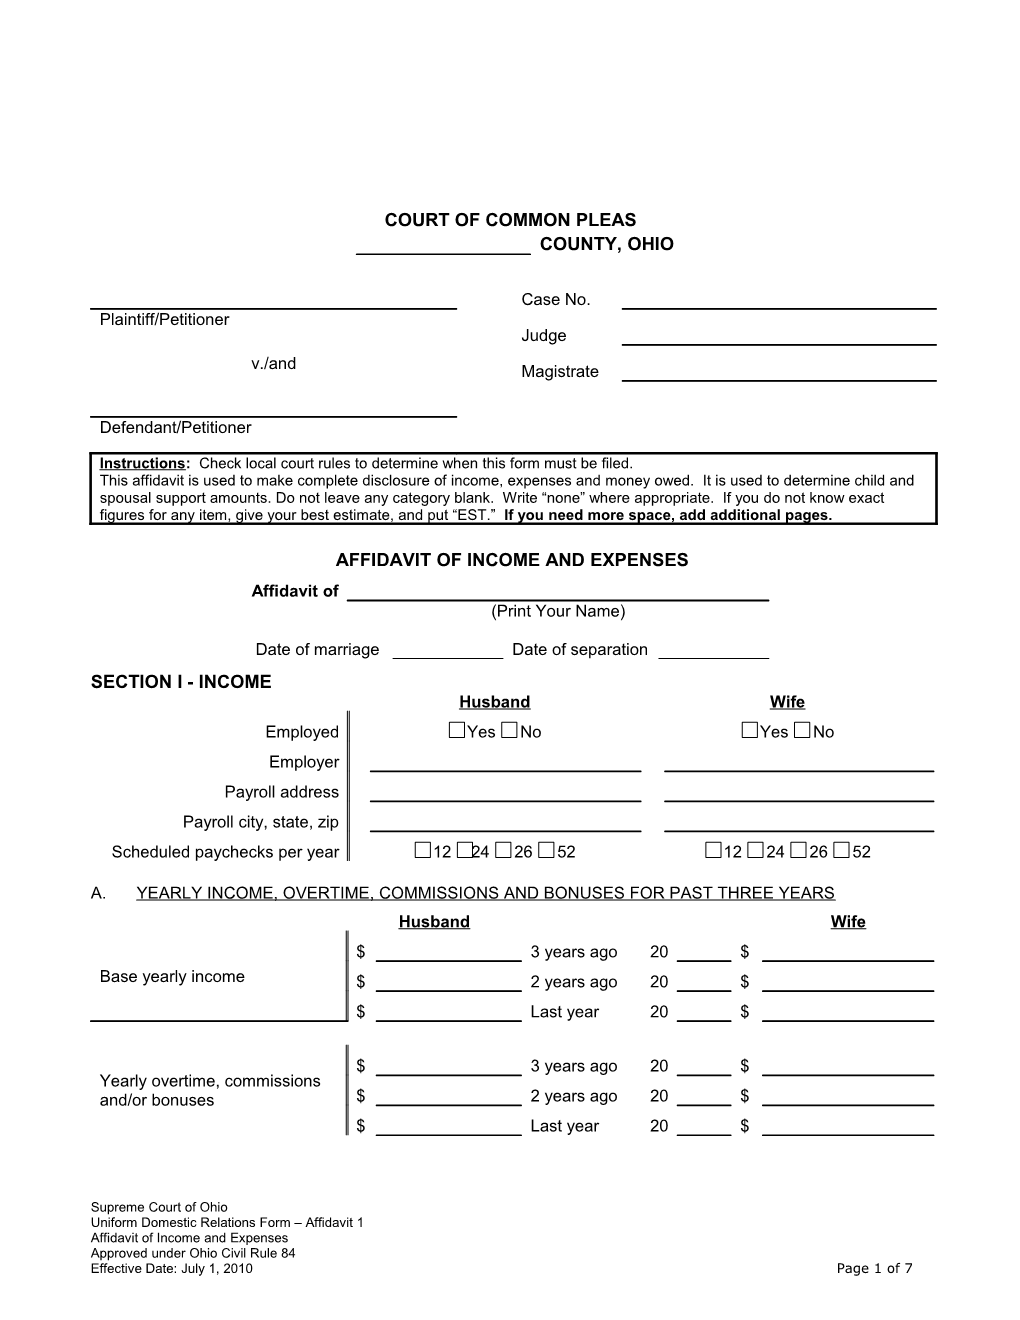 Amended Form Per Call with Crowder, Ergun